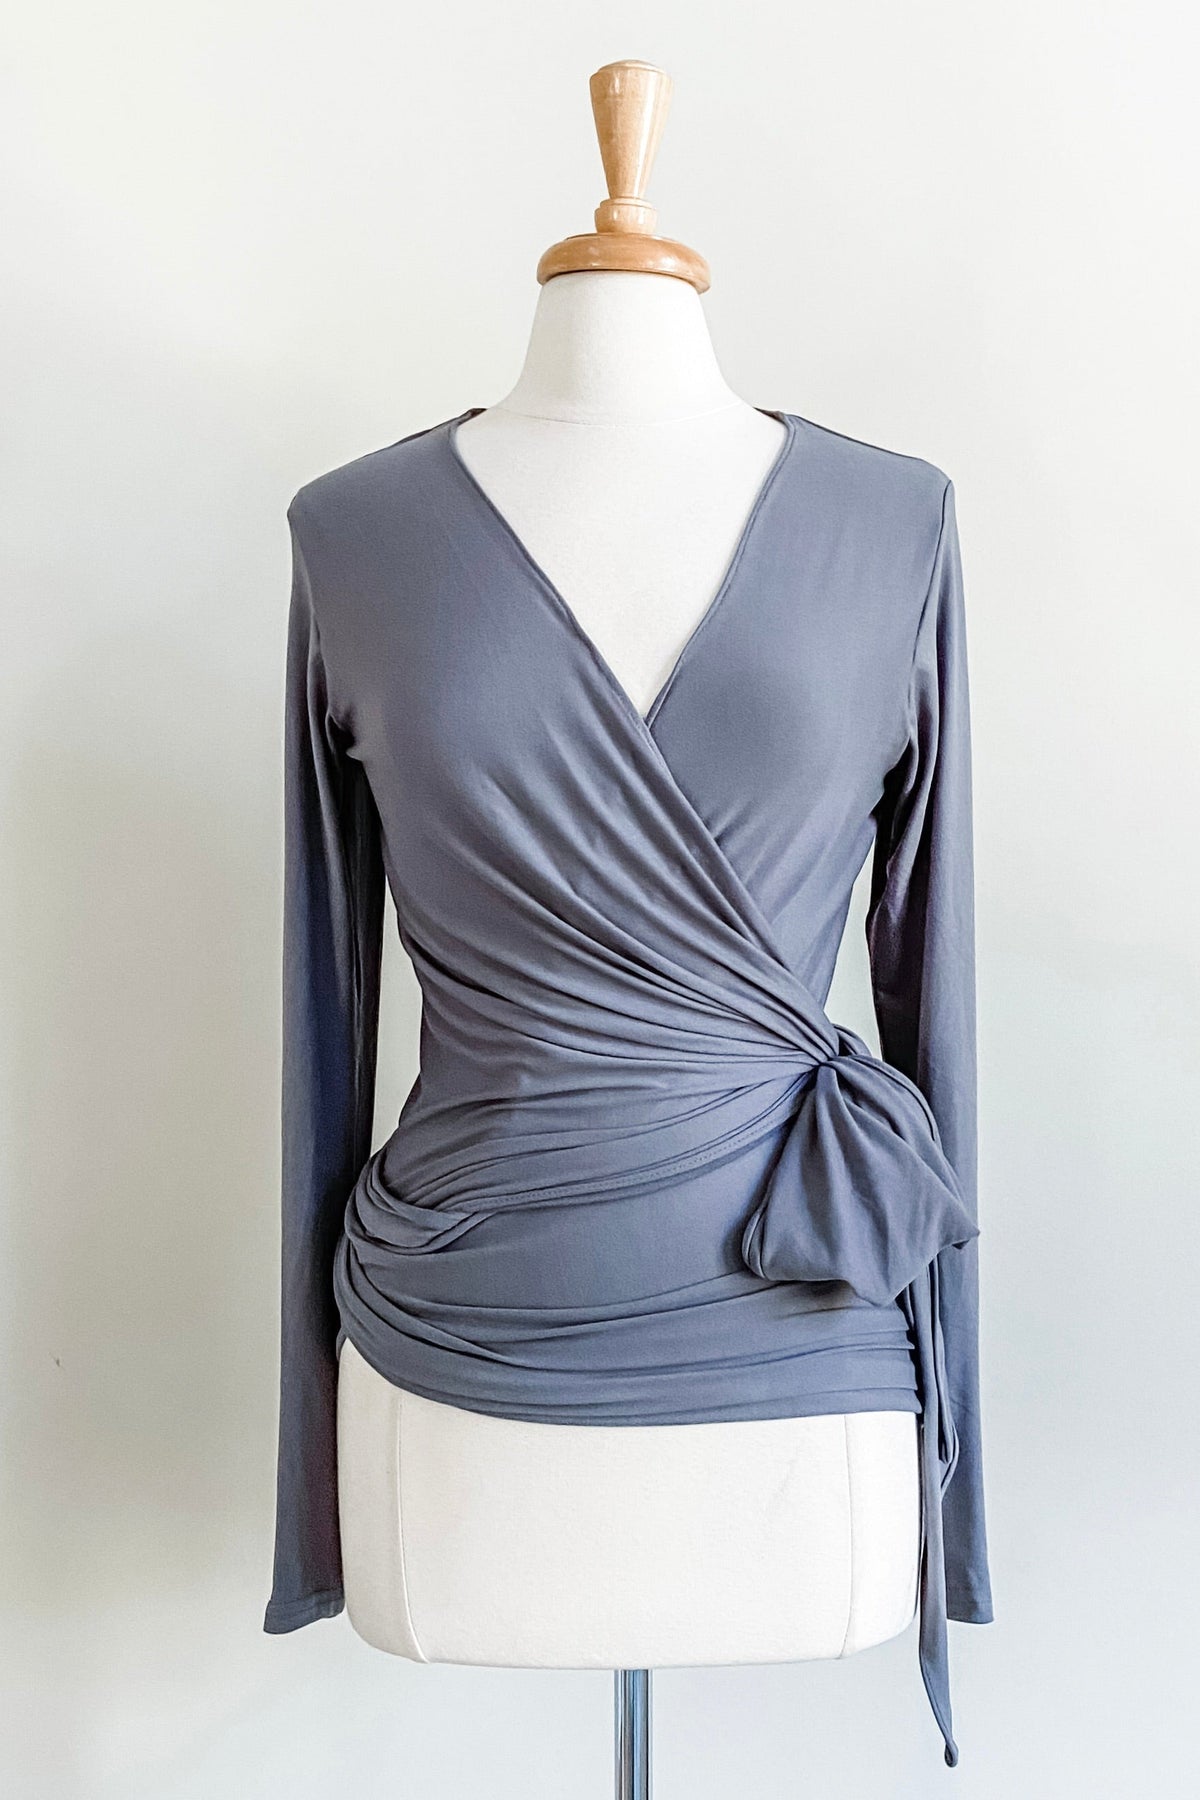 Diane Kroe Wrap Top (Slate) - The Classic Capsule Collection